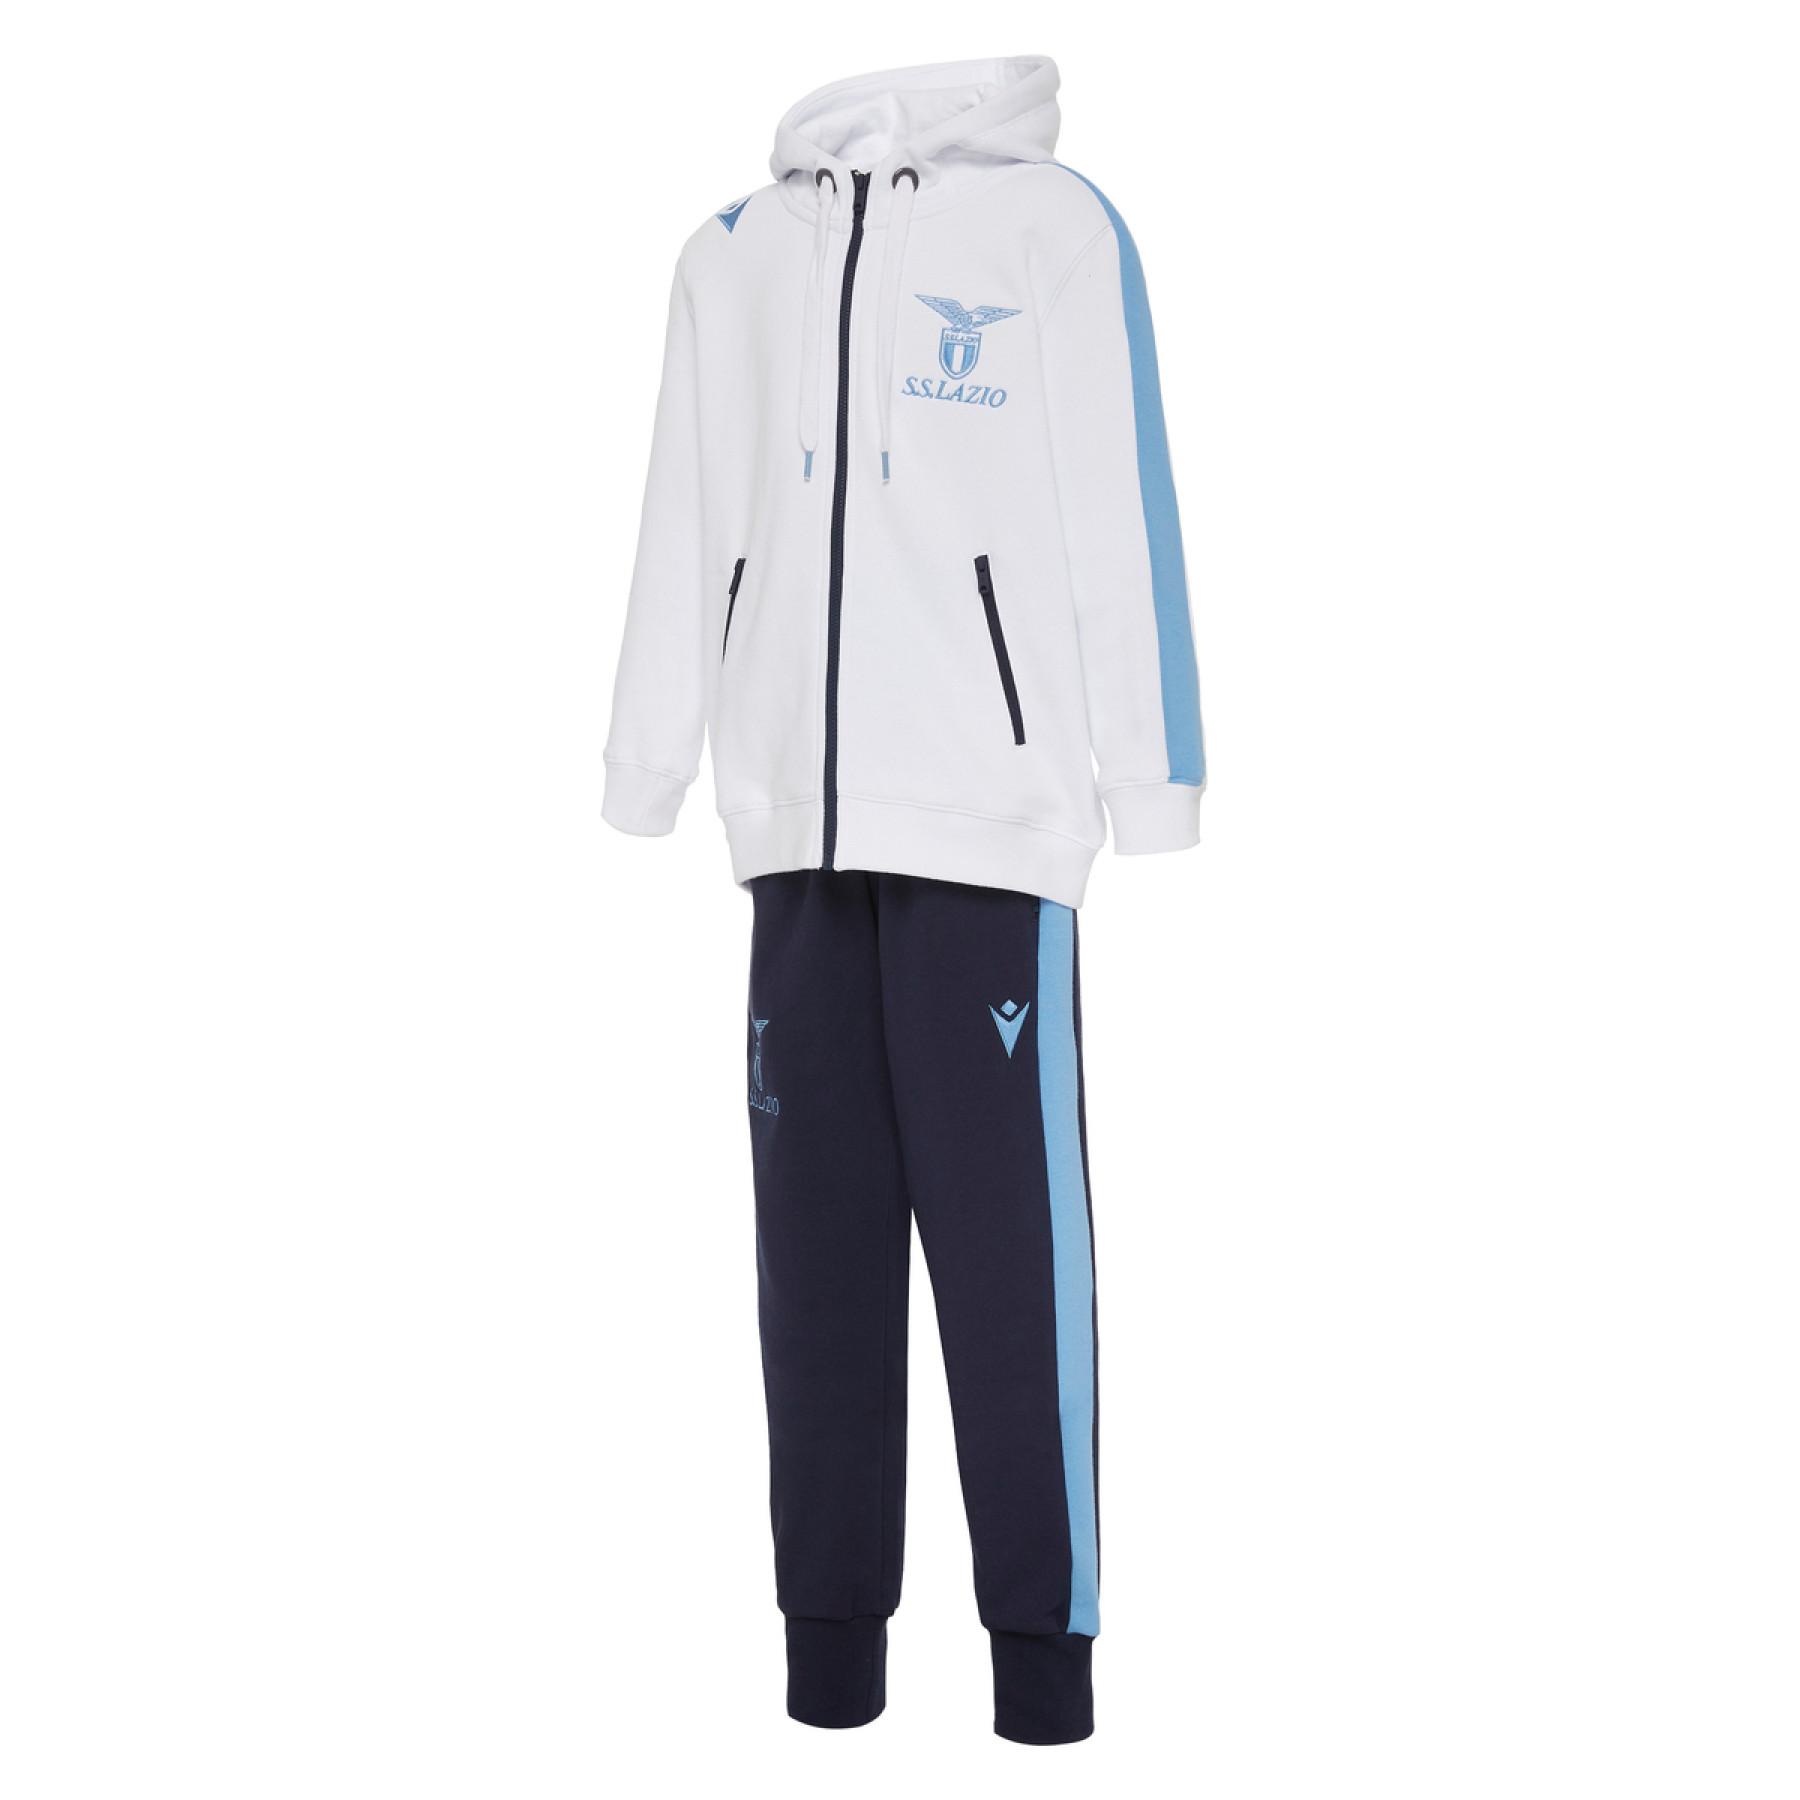 Details about   Erima Sports Training Football Kids Full Zip Jacket Long Sleeve Tracksuit Top 